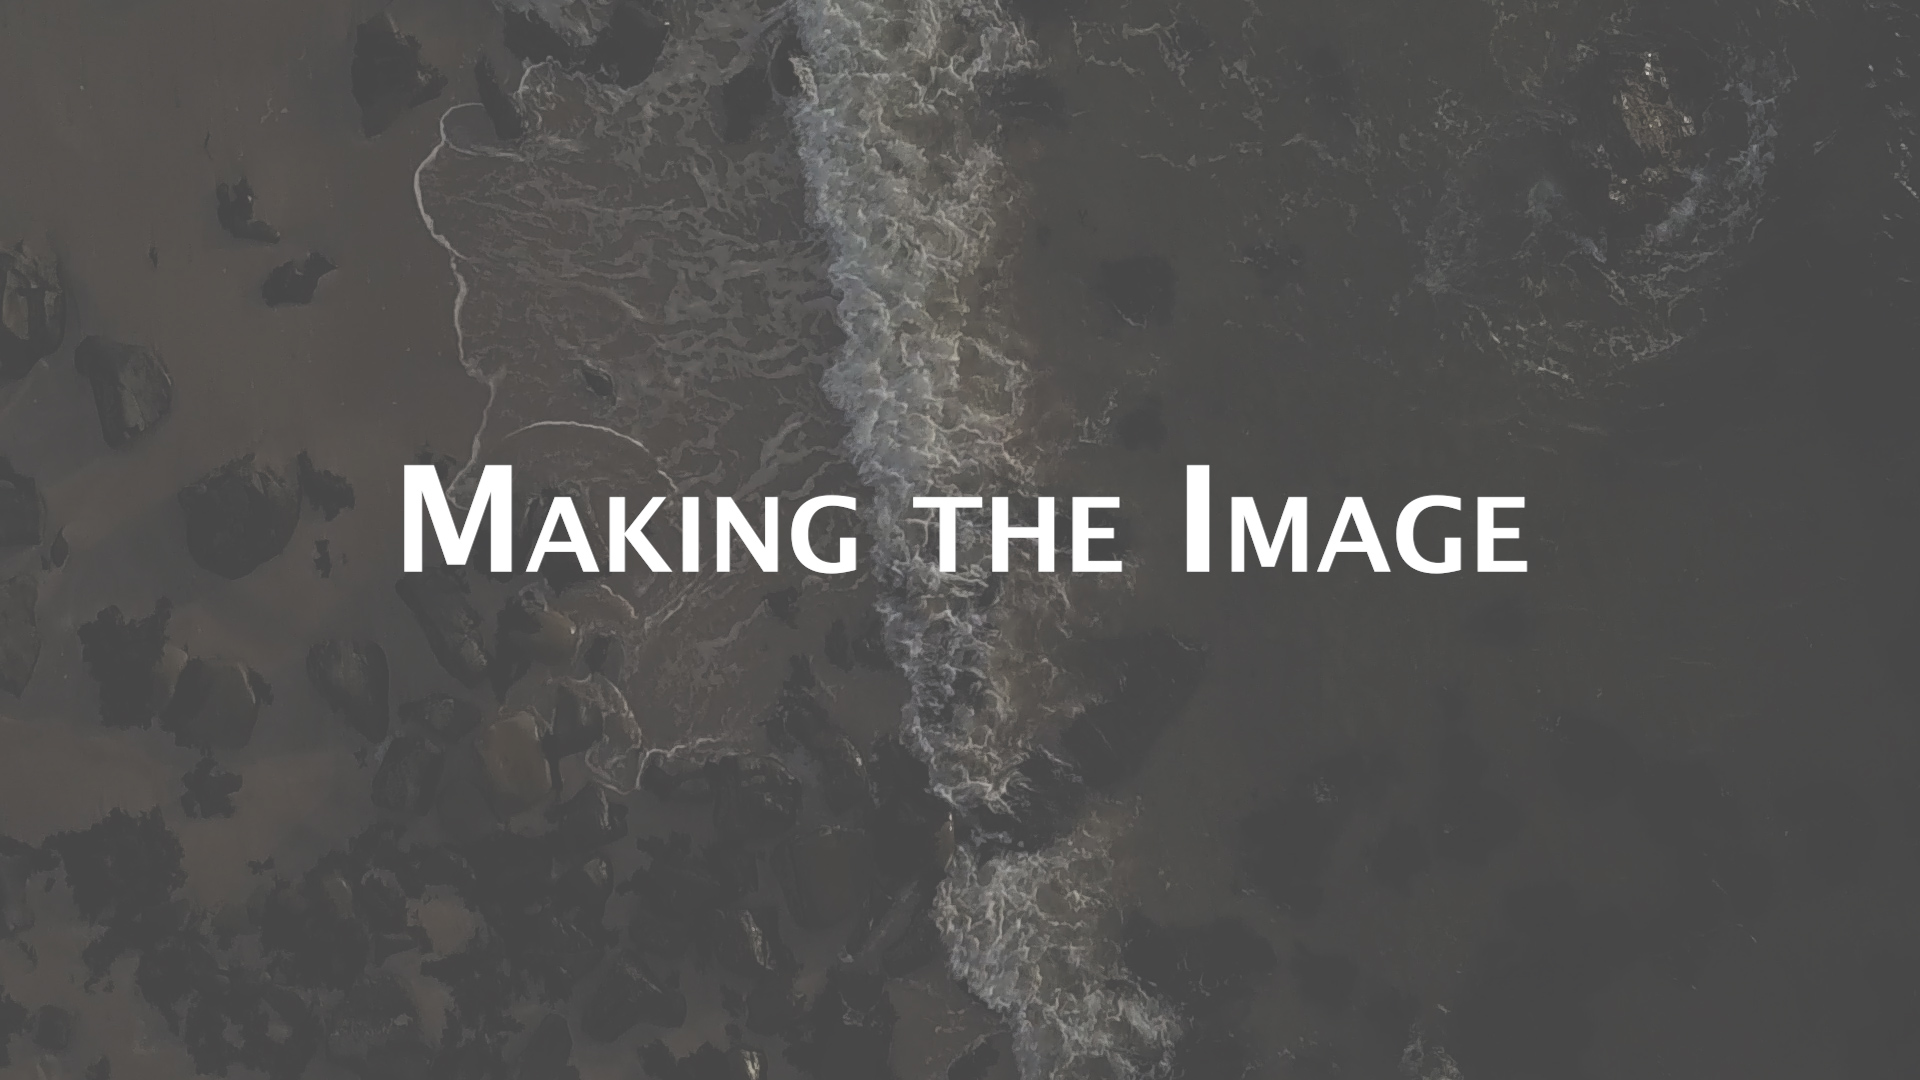 Making the Image